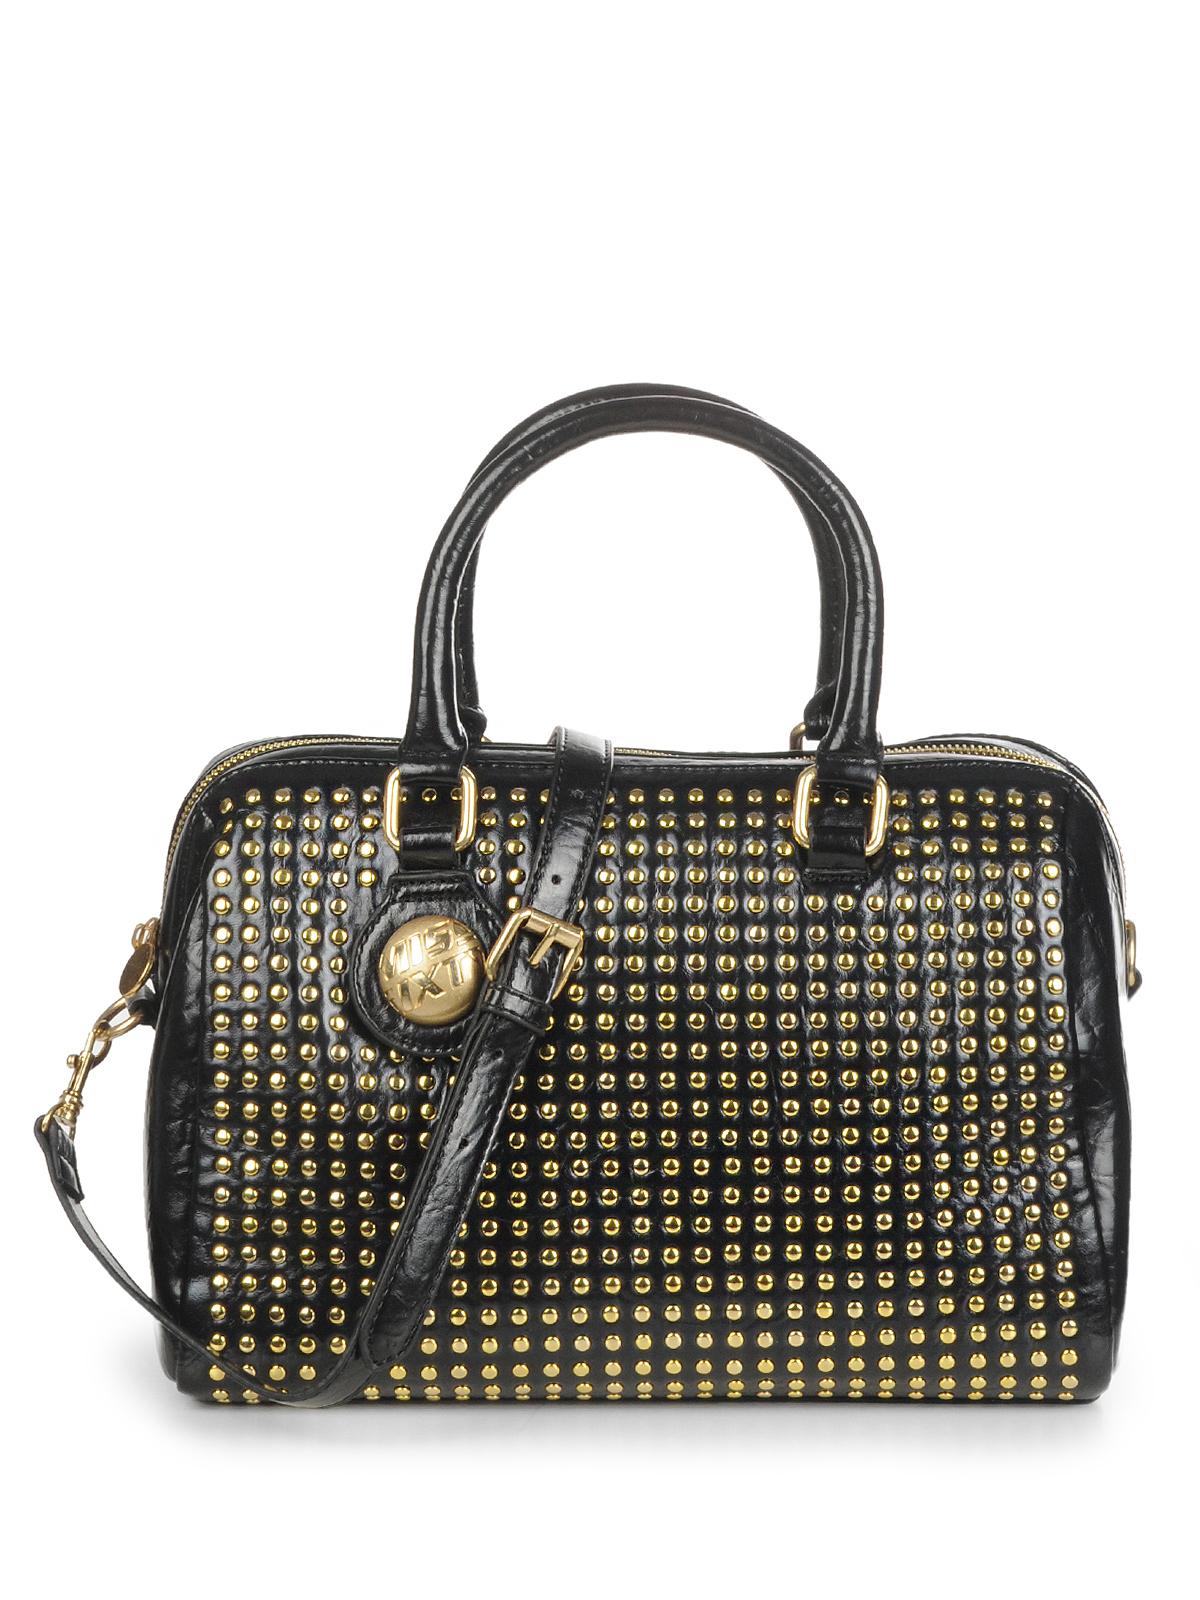 Foto Miss Sixty Opher Bolso negro ONE SIZE foto 289362